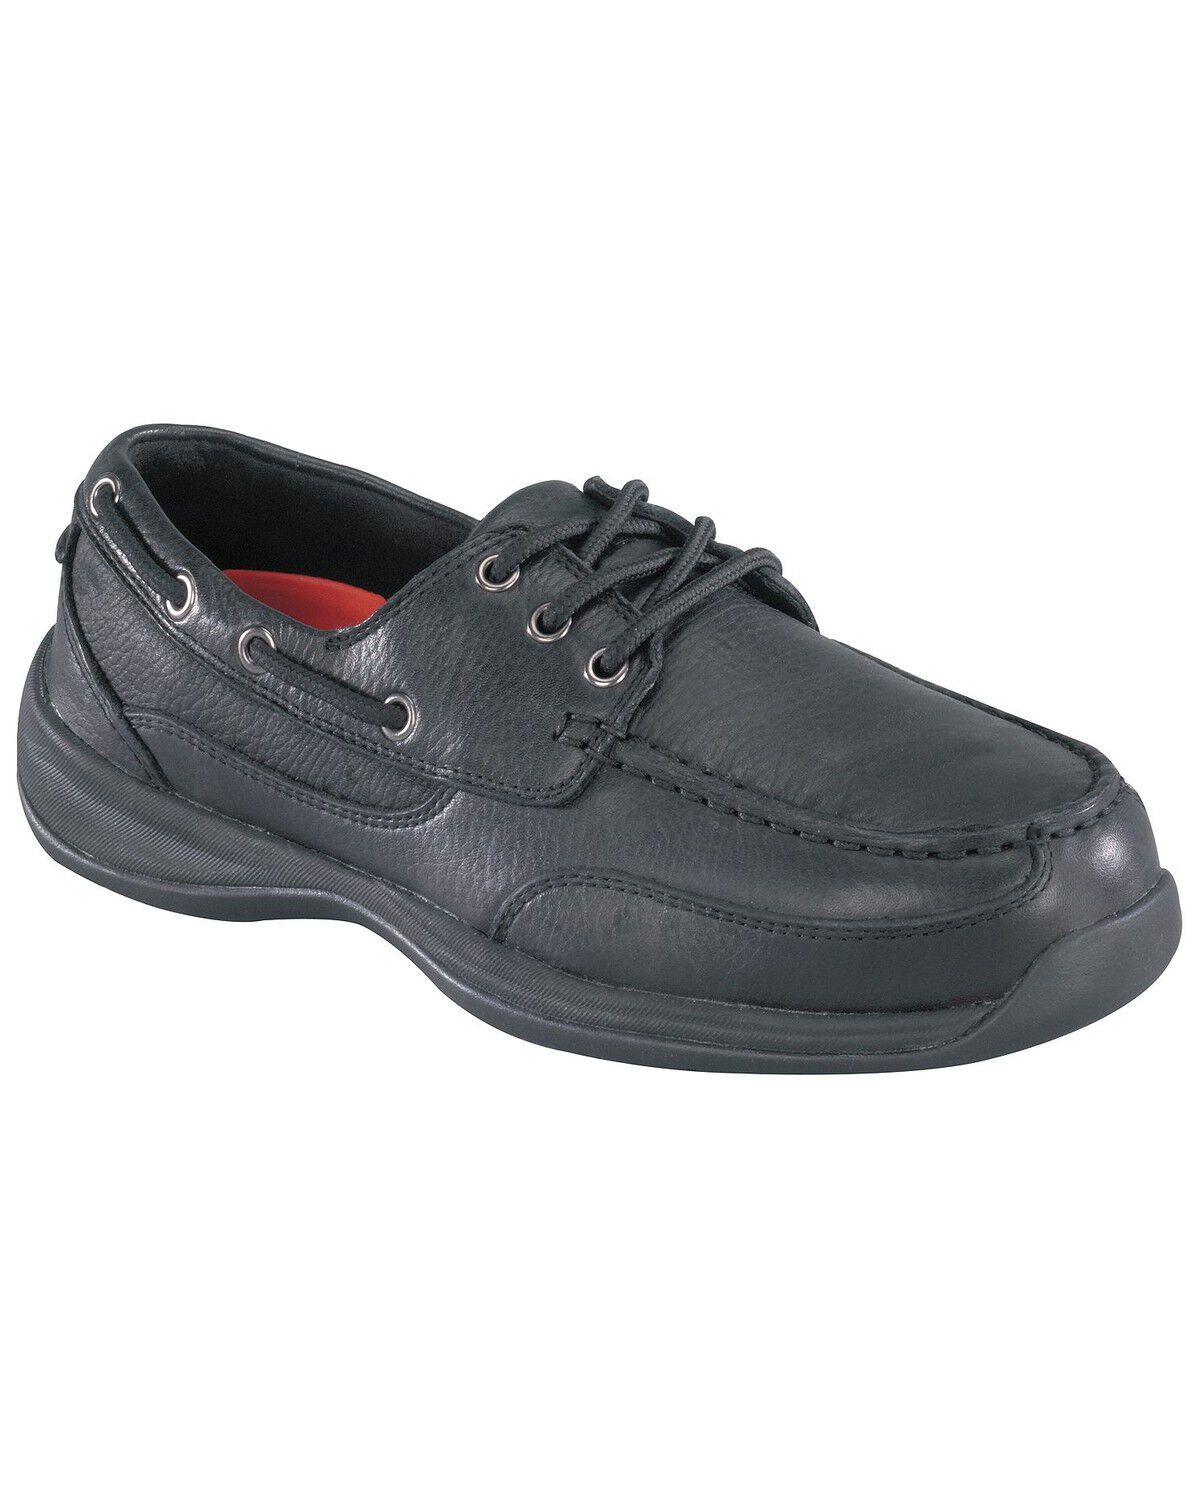 black boat shoes womens